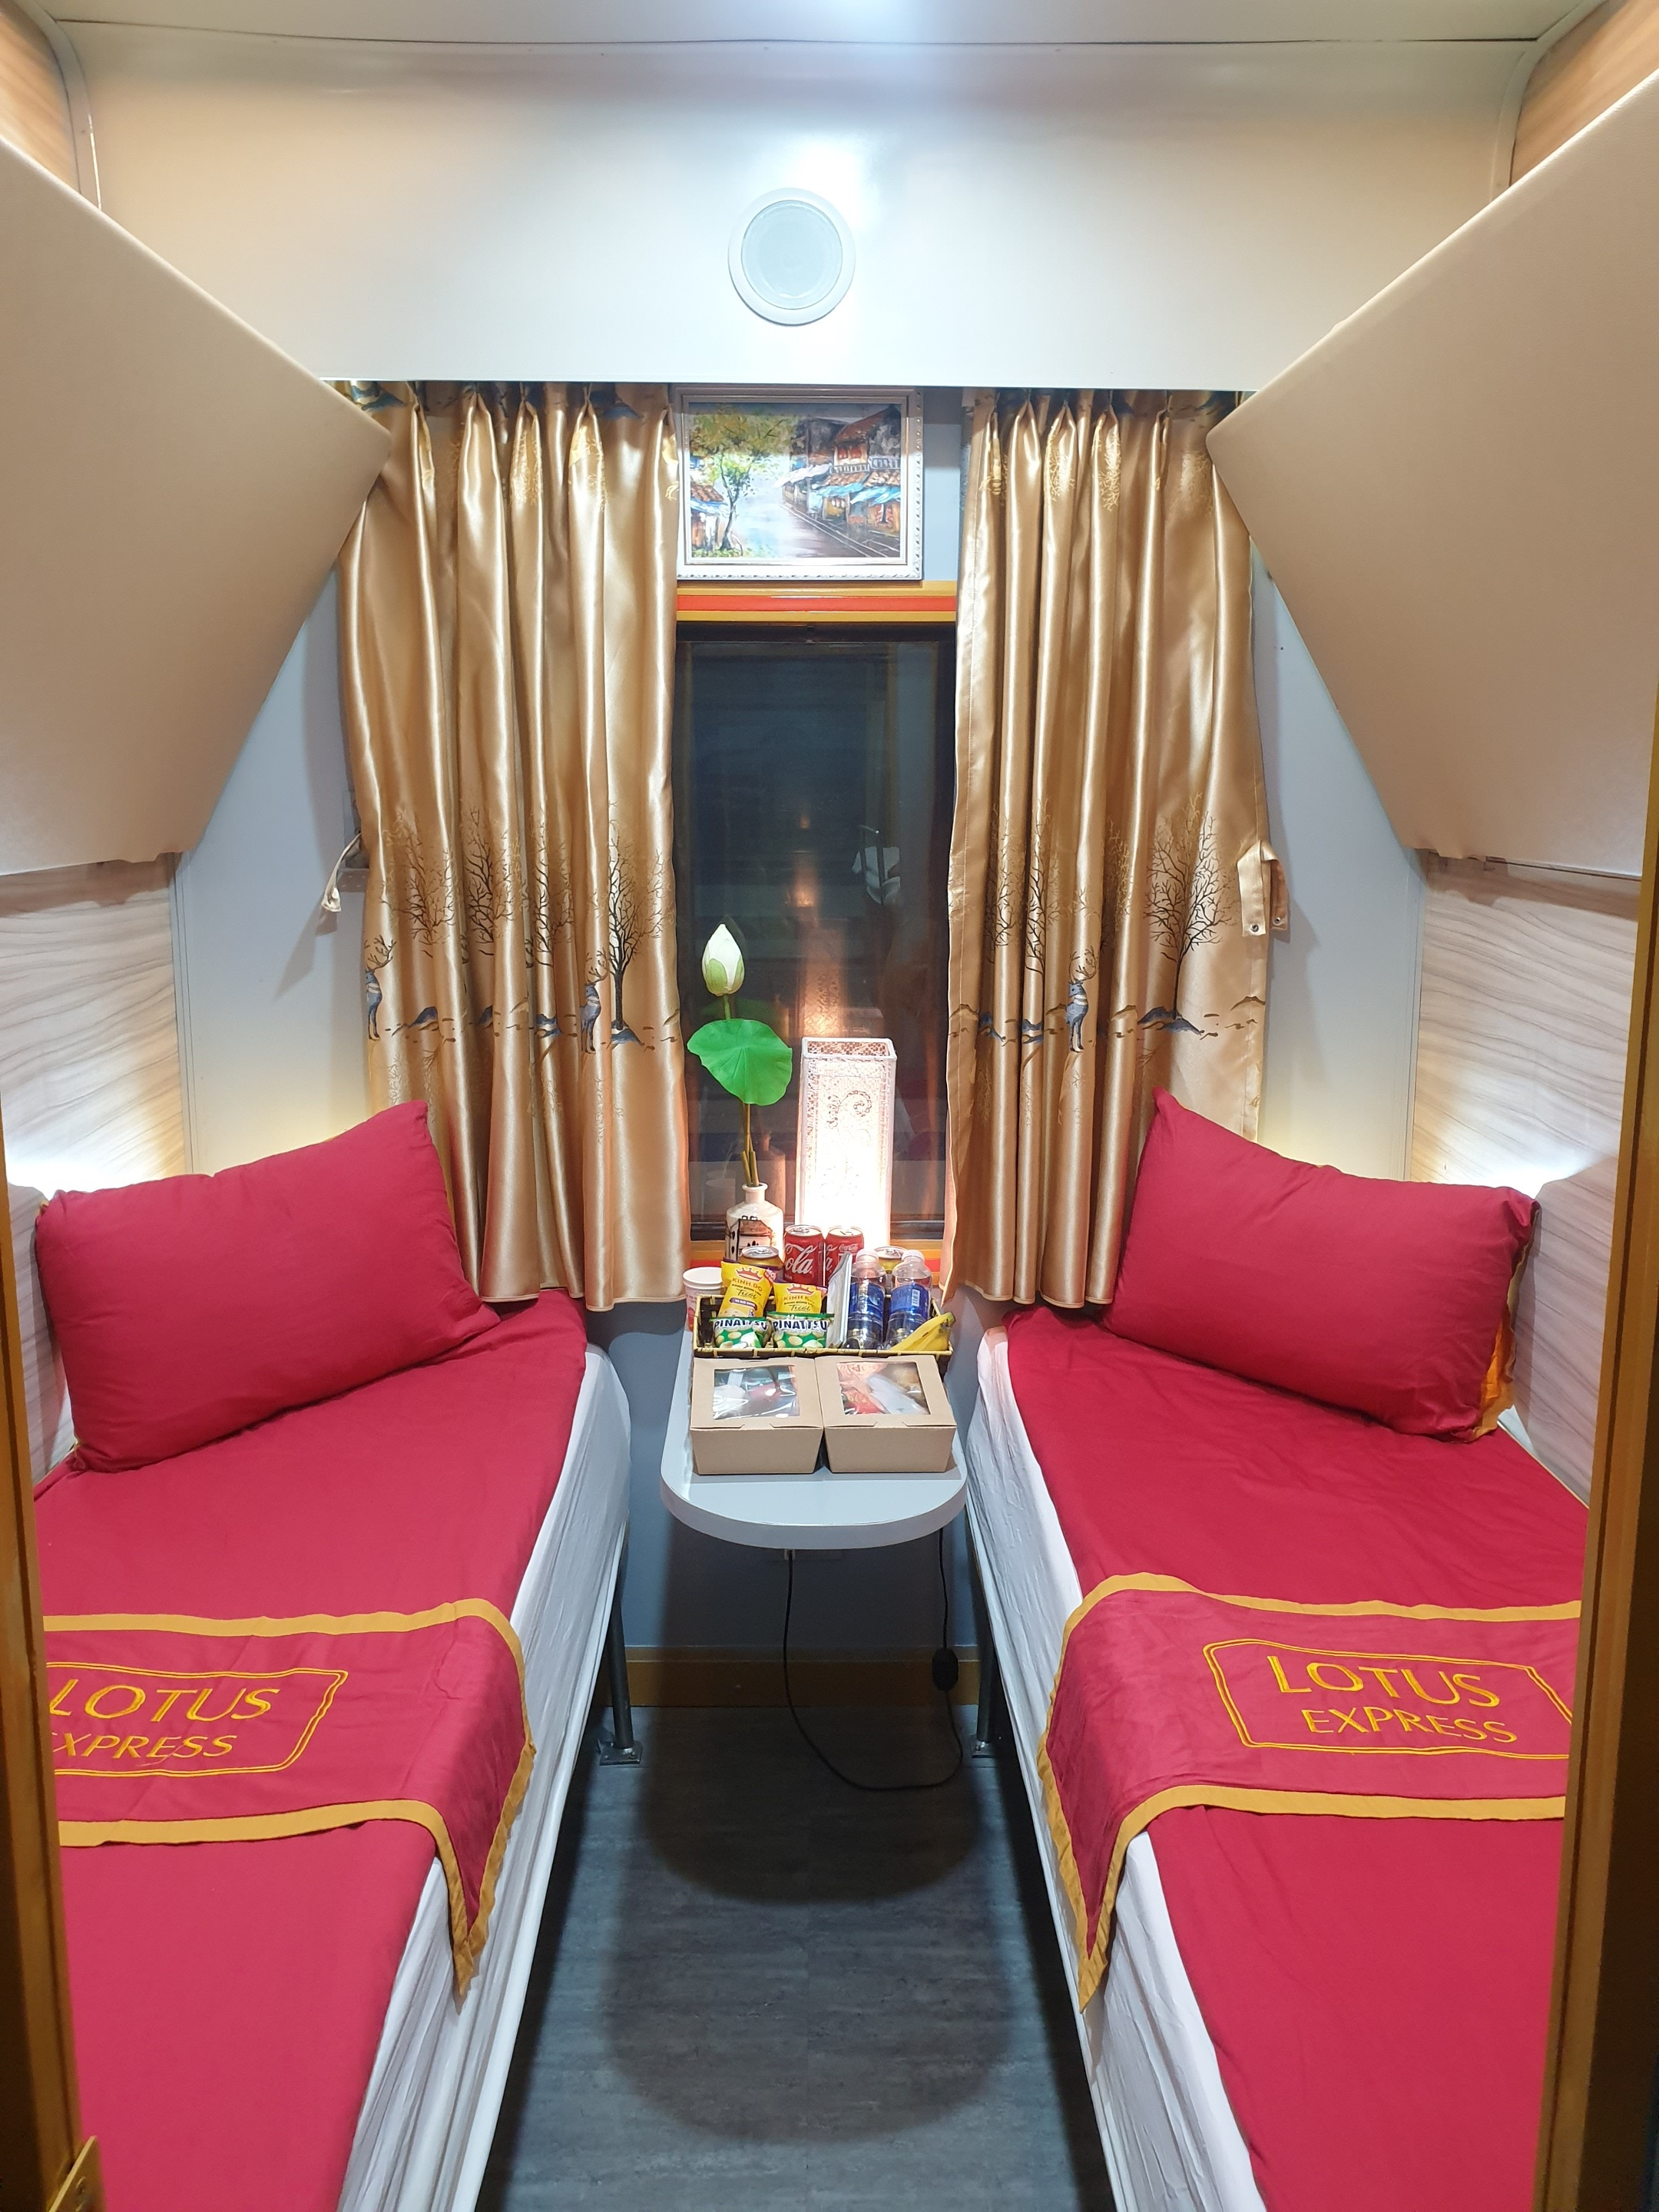 Dong Hoi - Ha Noi on SE20 (23h51 – 11h30) VIP 2 berth cabin, must book 2 tickets even you are solo traveler (VIP 2 Sleepers, One Way)